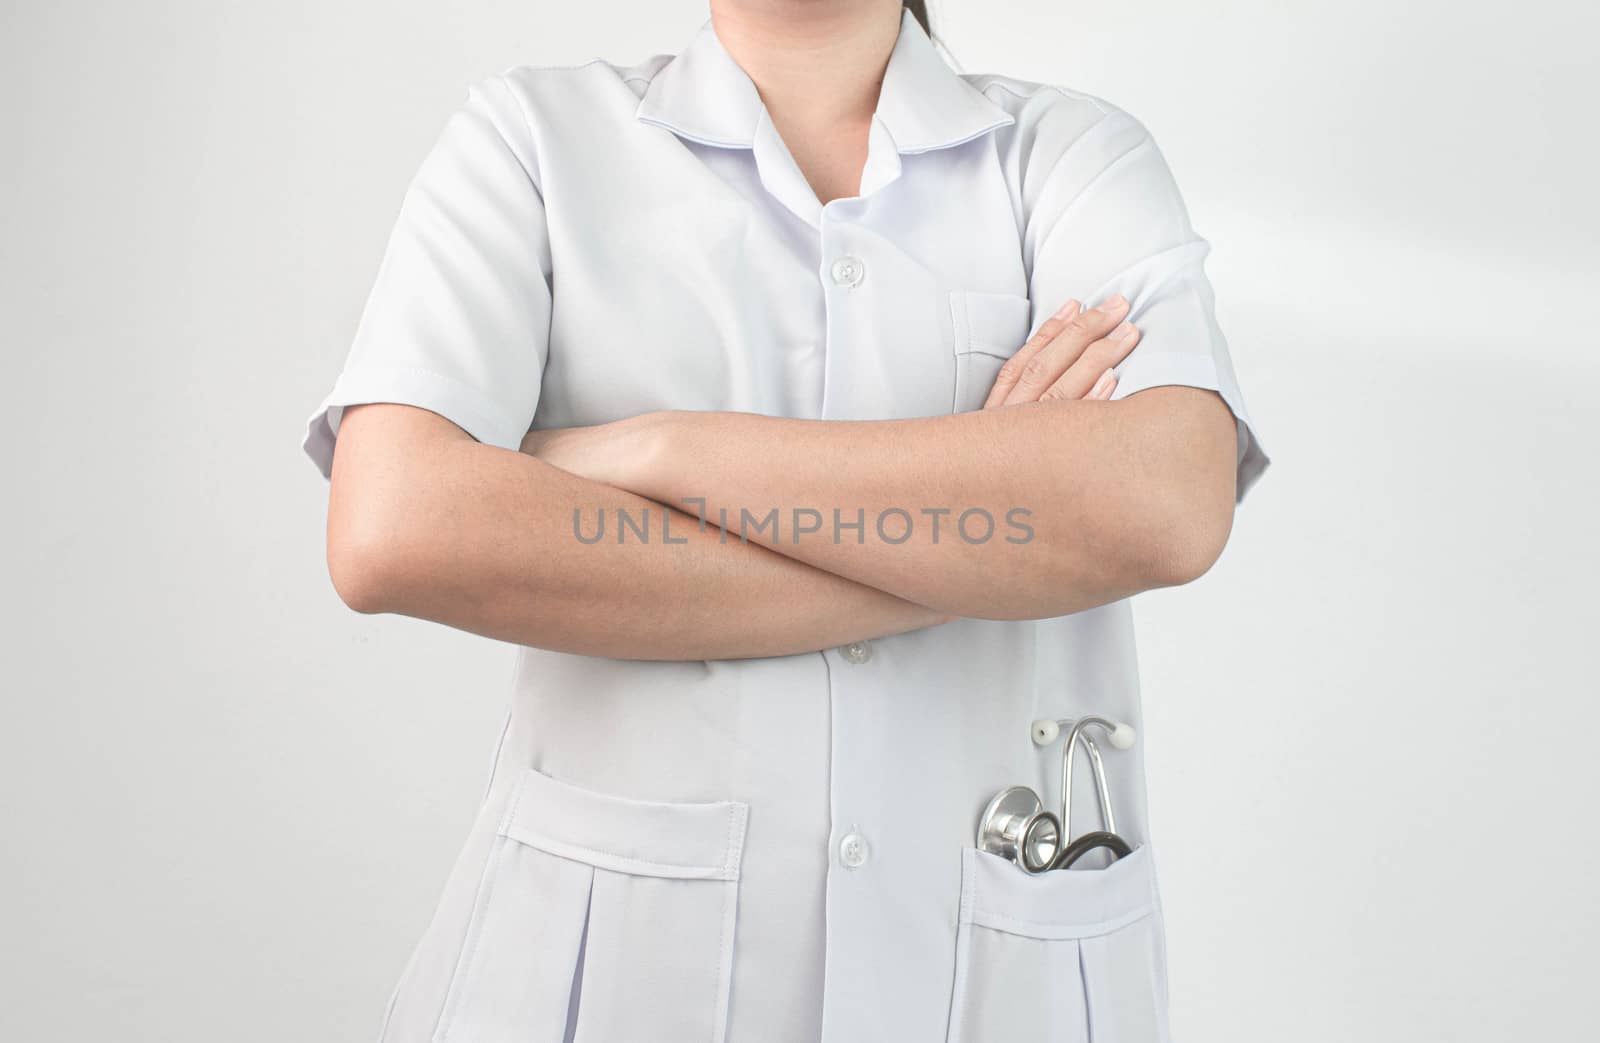 Confident woman doctor posing with arms crossed and stand over white background.